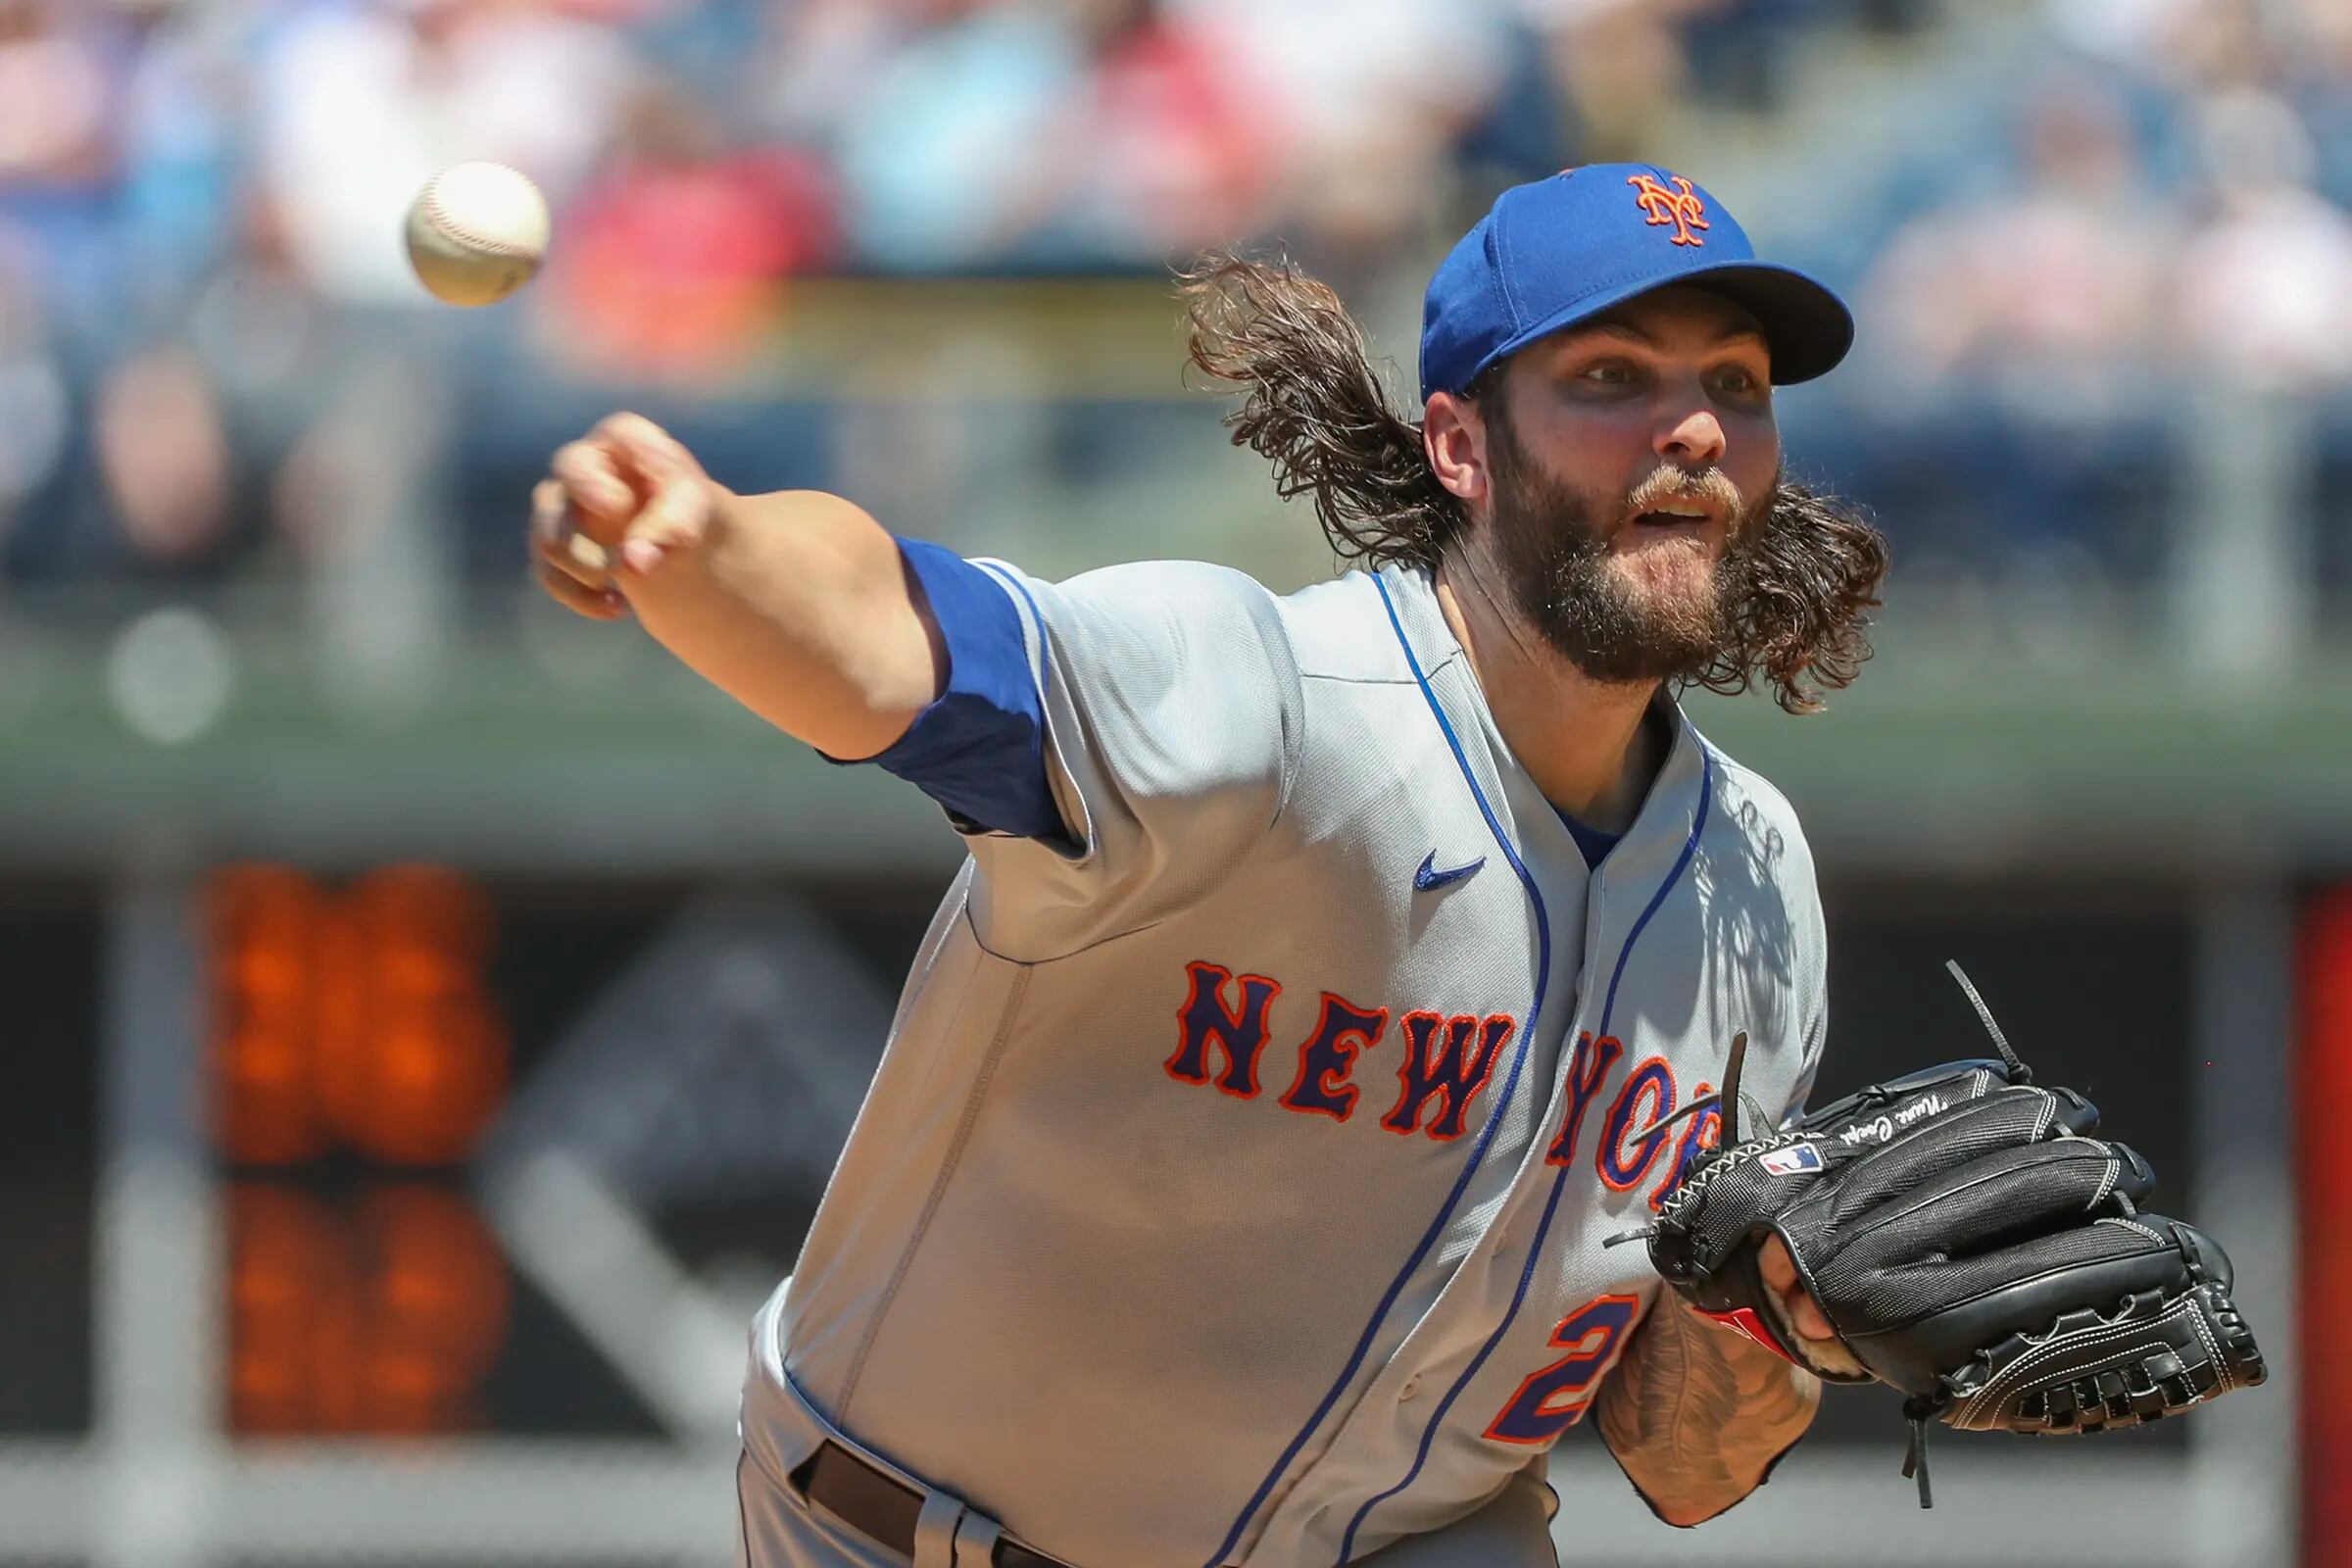 New York Mets silence Phillies for second no-hitter in 9,588-game history, New York Mets